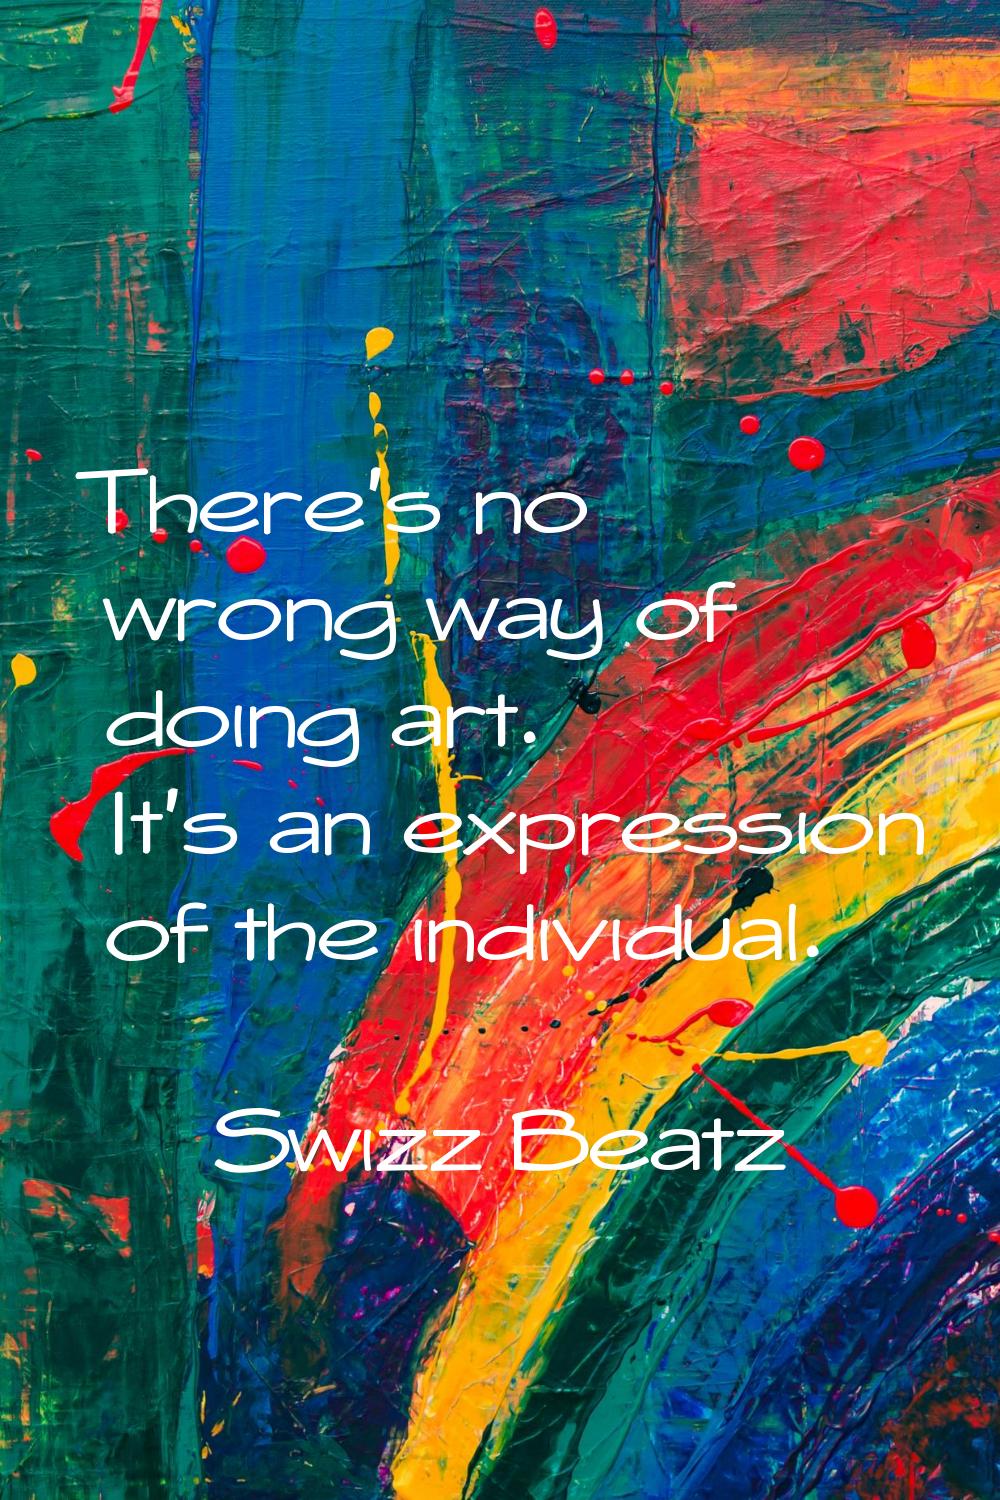 There's no wrong way of doing art. It's an expression of the individual.